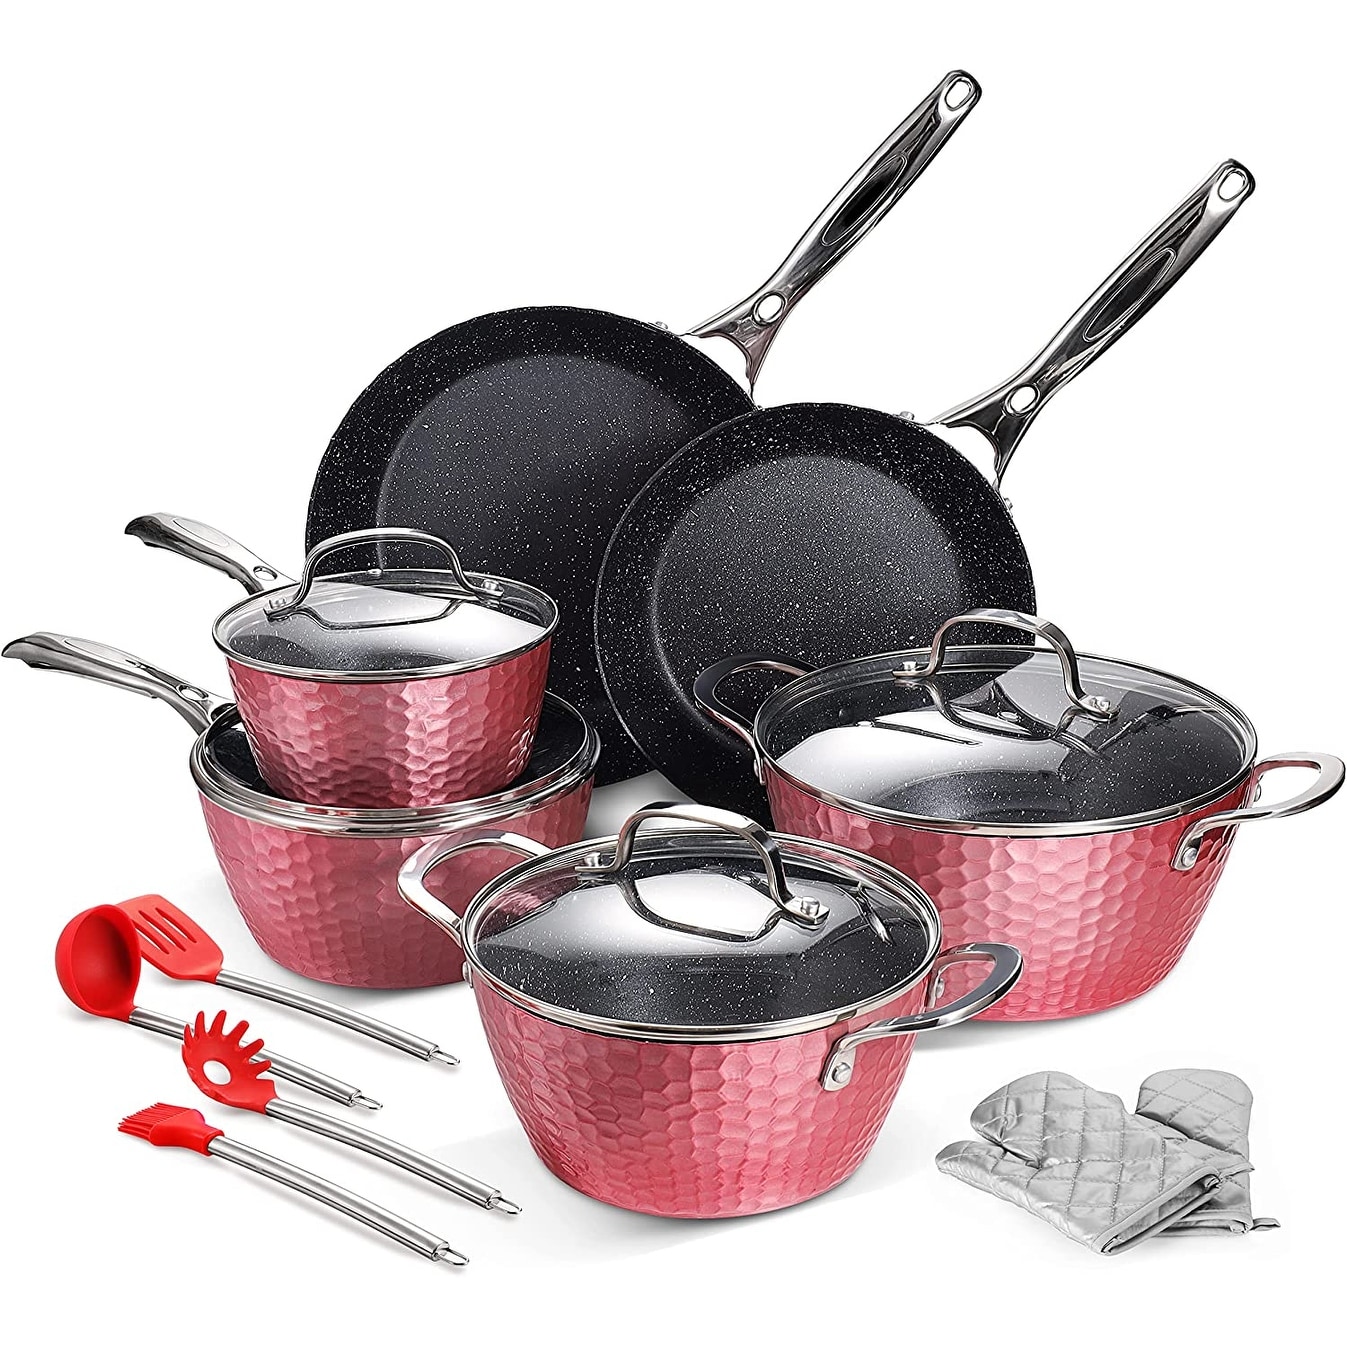 7 Piece Cream Kitchen Cookware Set - Dishwasher Safe Aluminium Pots & Pans  Set with Non-Stick Coating - Suitable for All Hobs